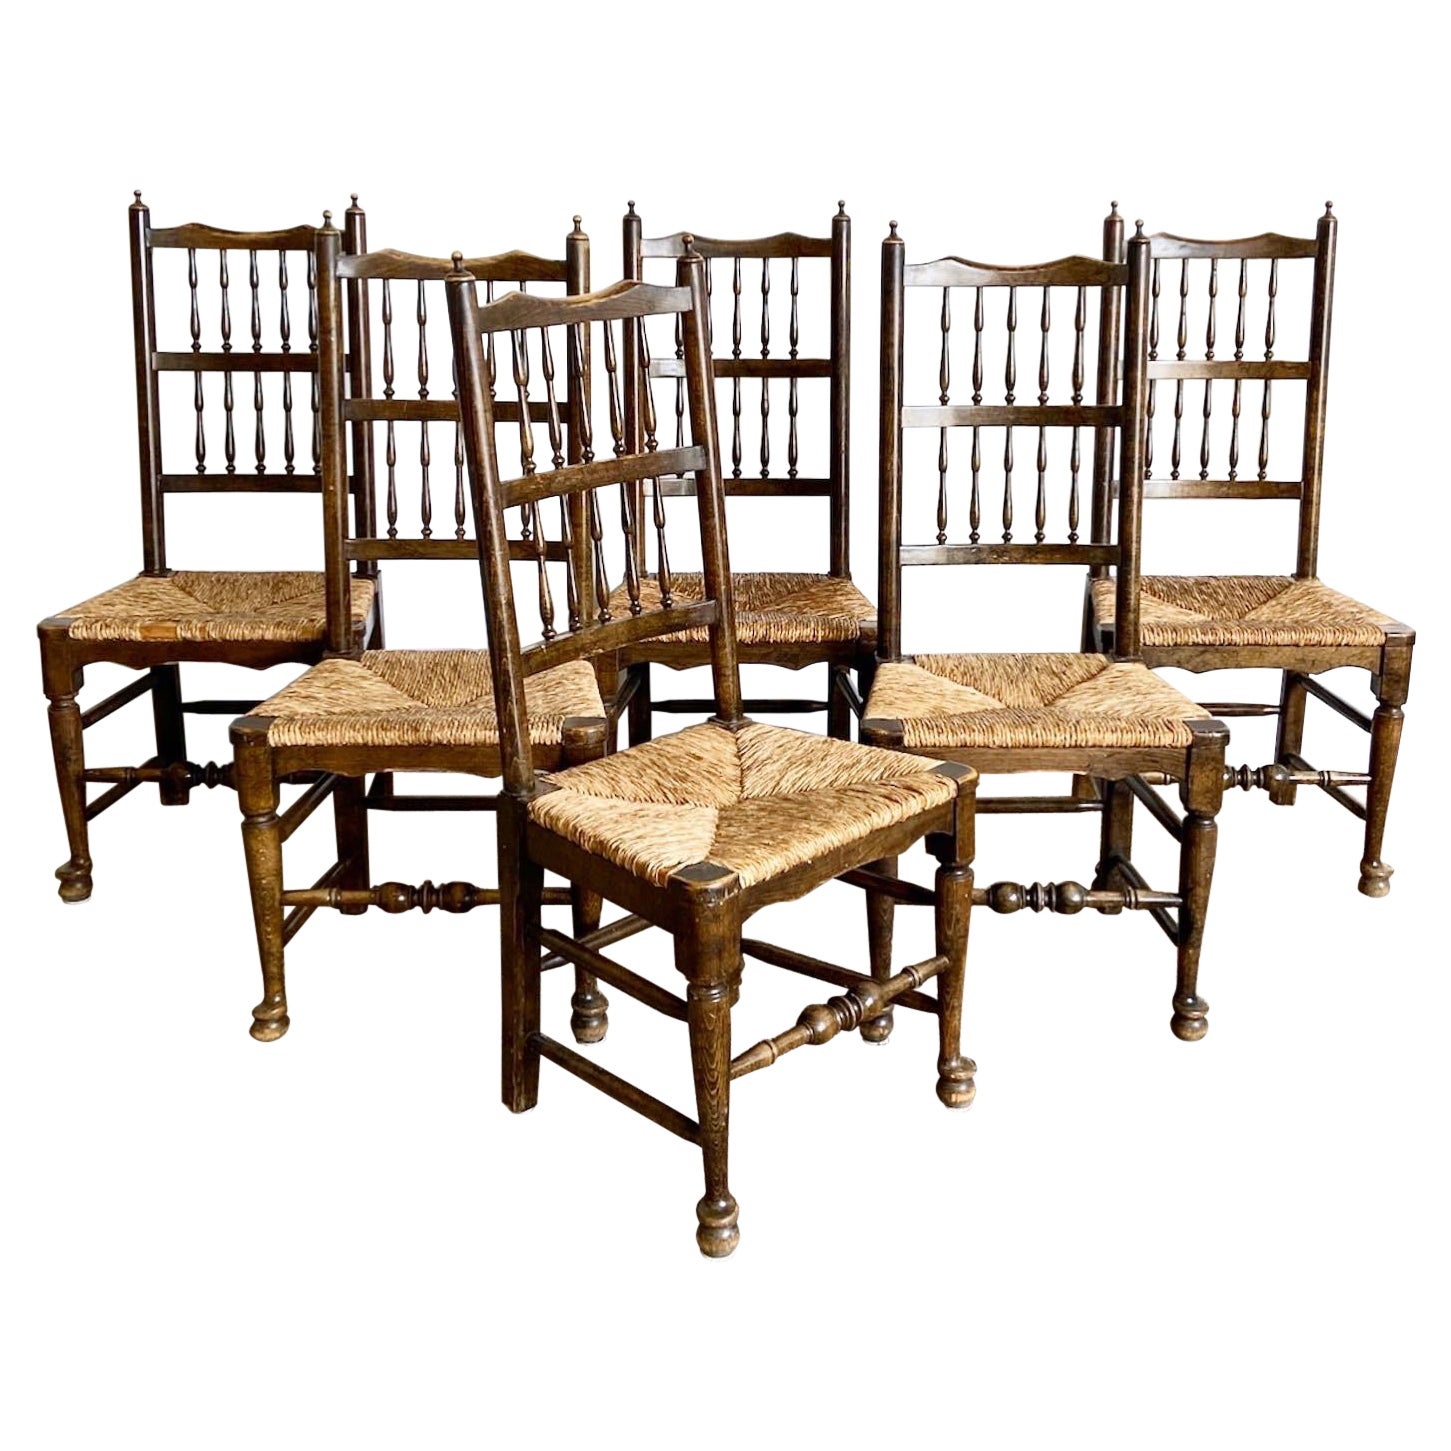 Farmhouse Spindle Back Rush Seat Wooden Dining Chairs - Set of 6 For Sale